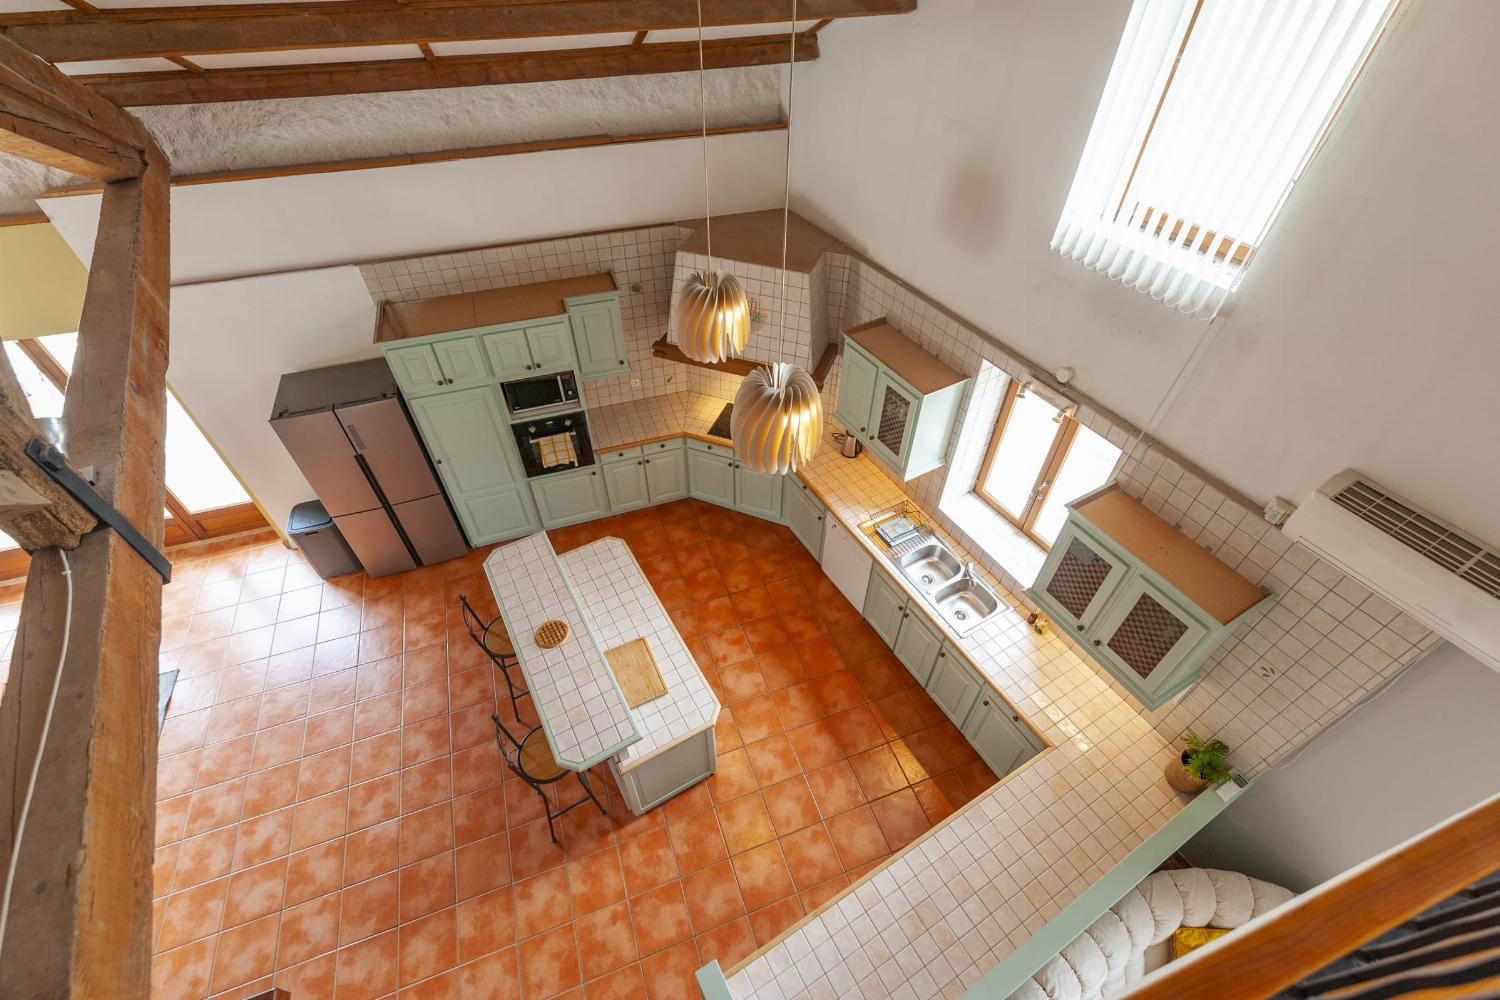 Kitchen | Holiday villa in South of France